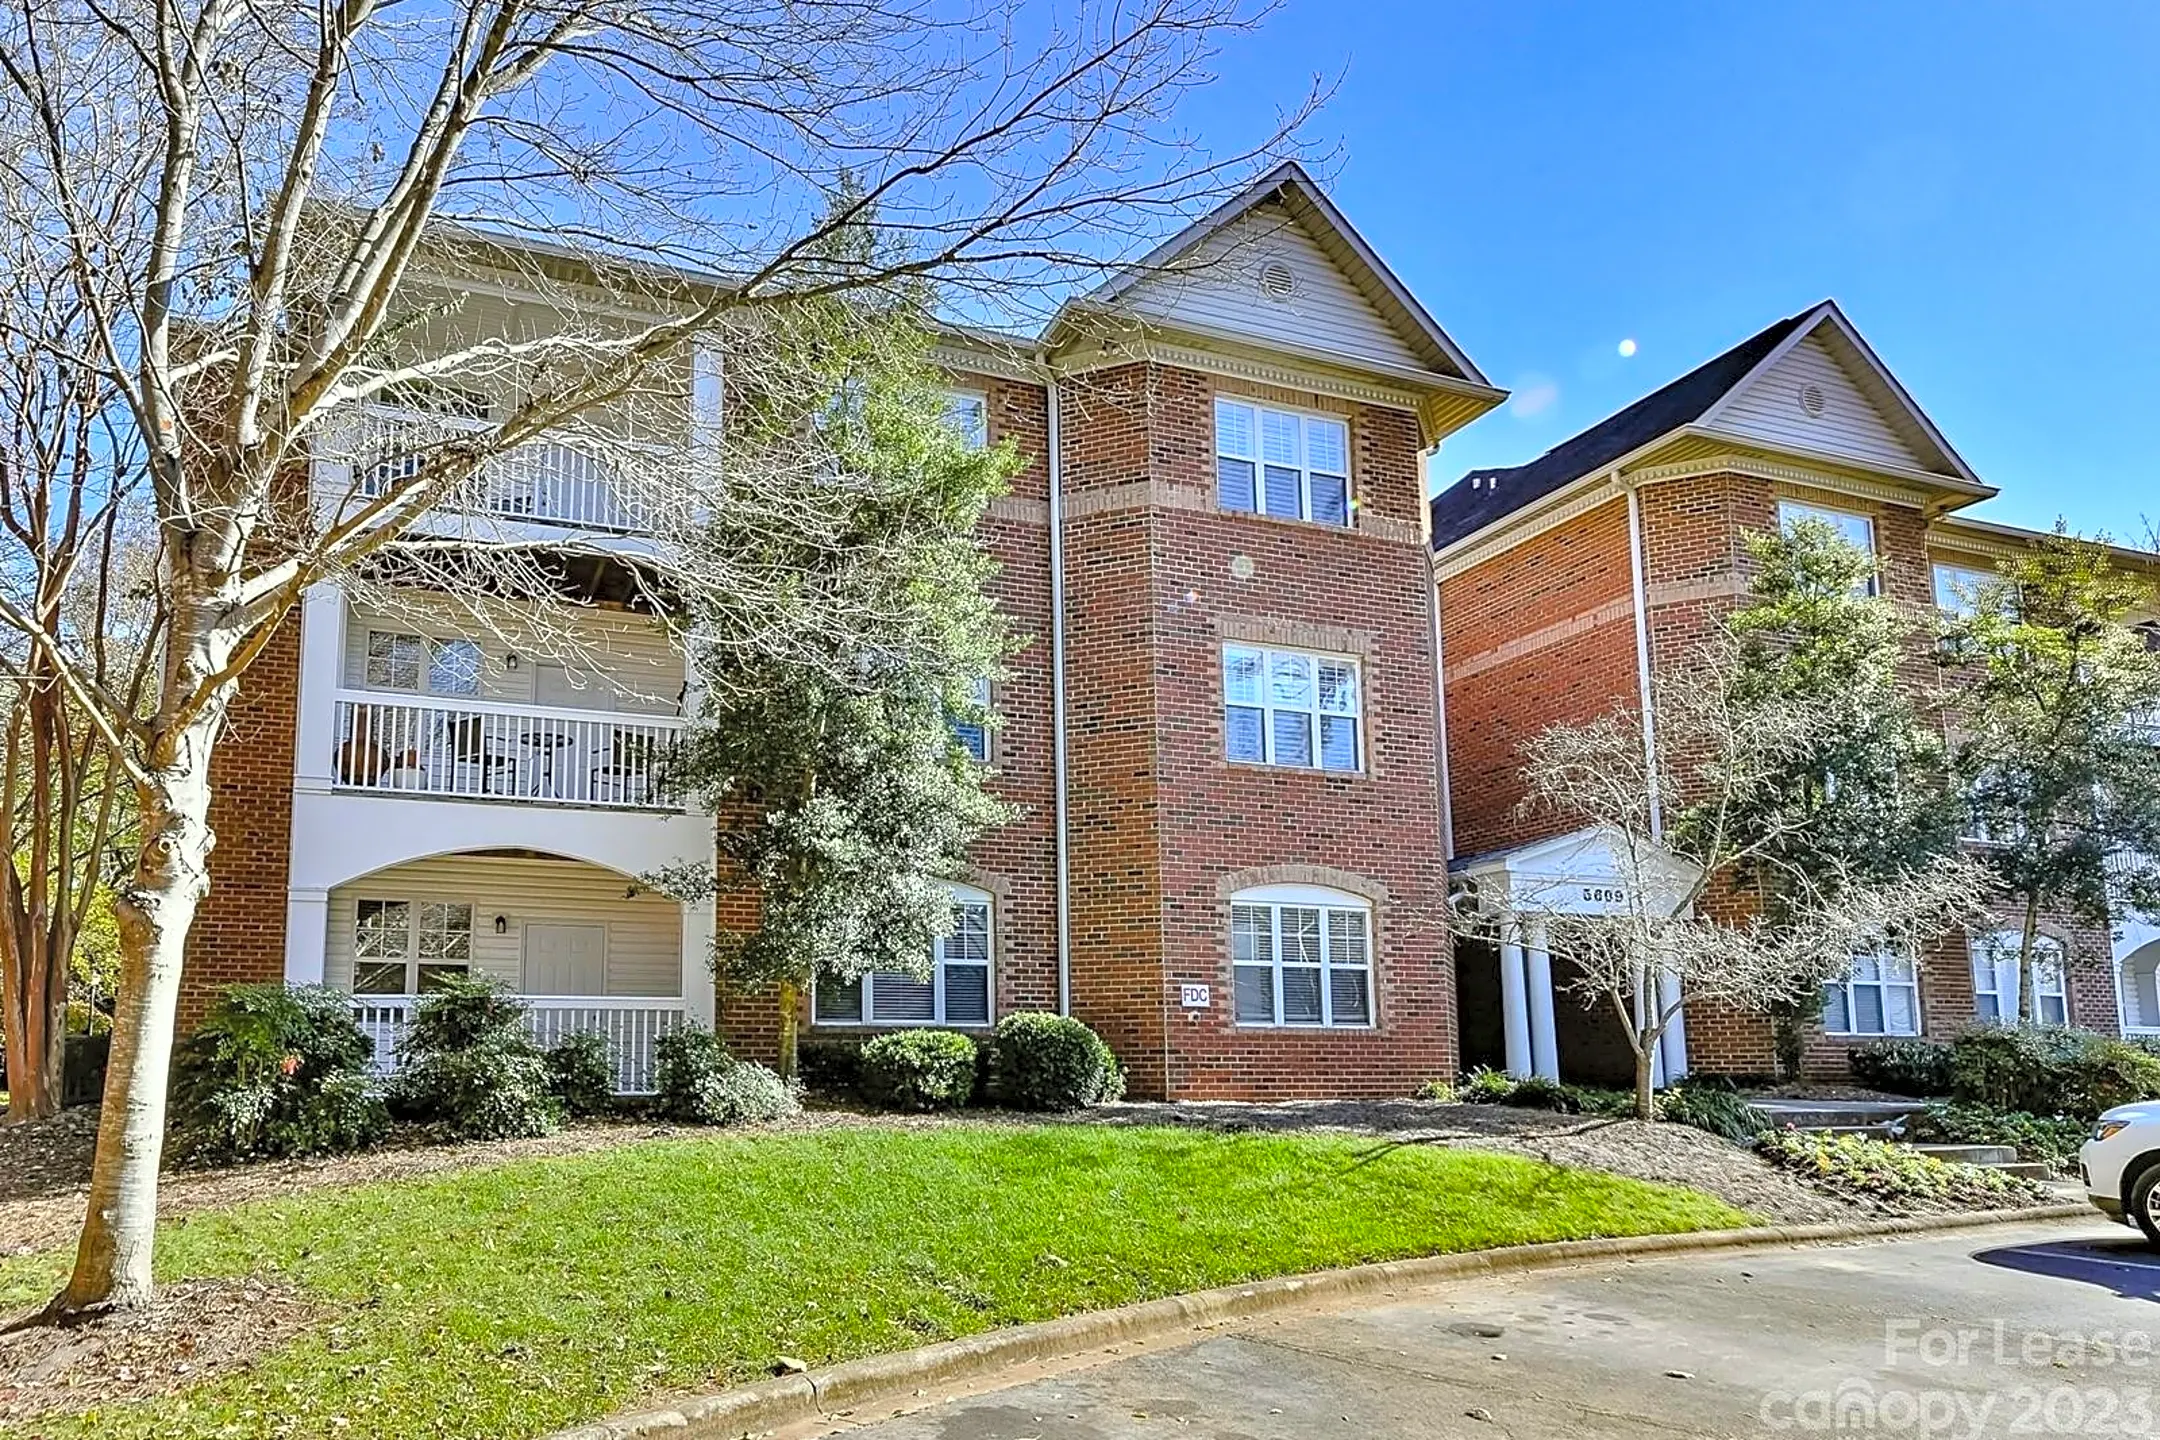 Building - 5609 Fairview Rd #1 - Charlotte, NC